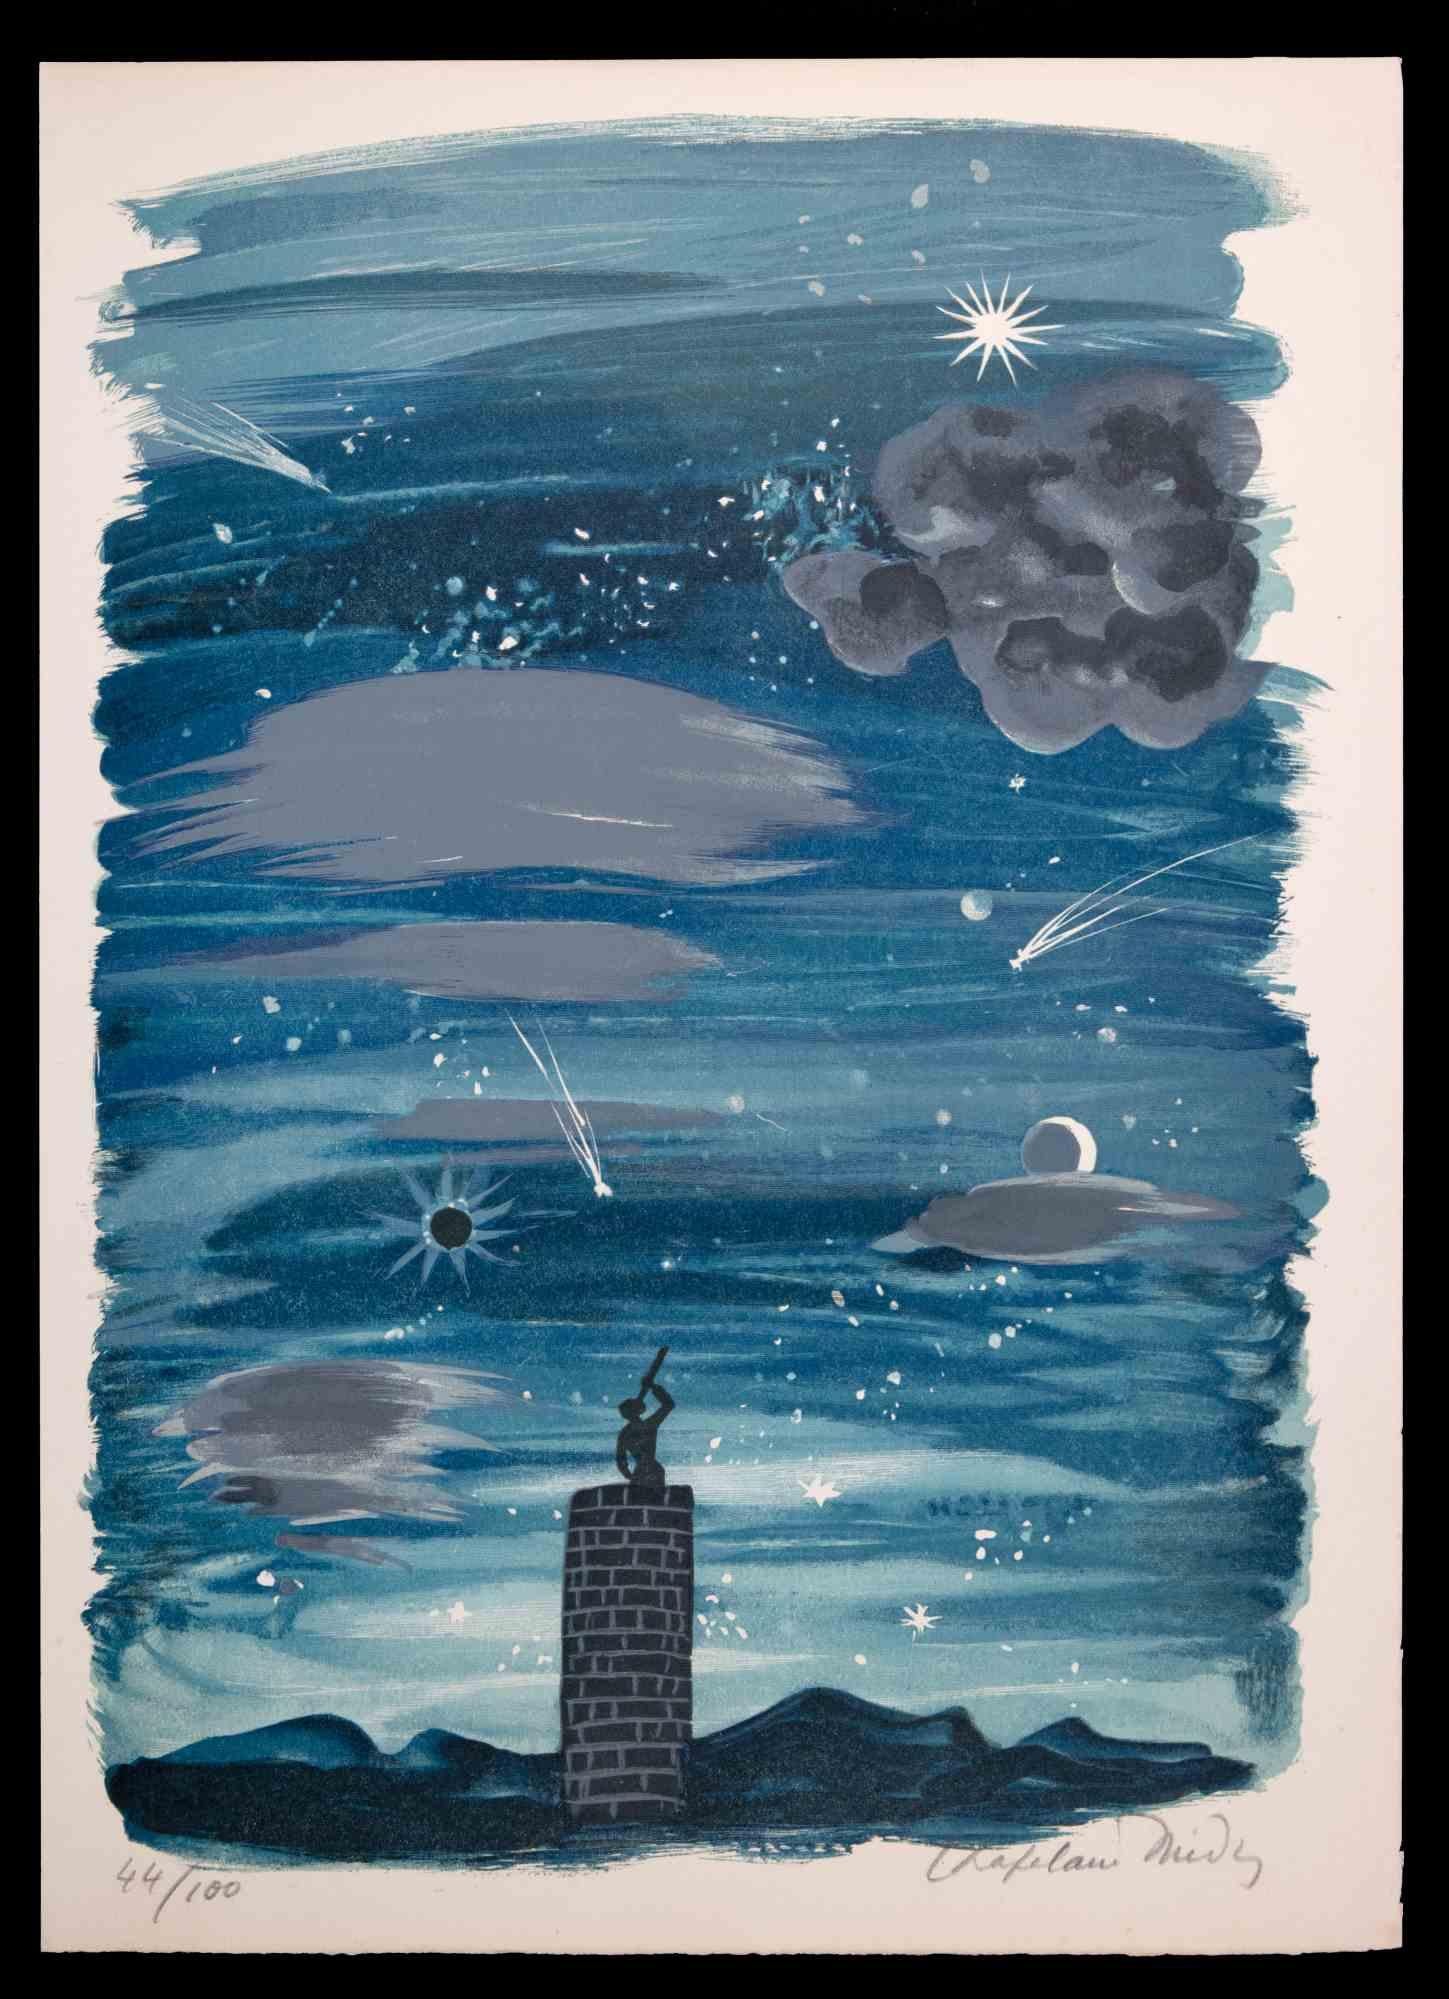 Starry Sky is an Original Litograph realized by Roger Chapelain-Midy in 1962.

The beautiful artwork is in good condition.

Hand-signed by the artist on the lower right corner.

Roger Chapelain, known as Roger Chapelain-Midy, born on August 24, 1904